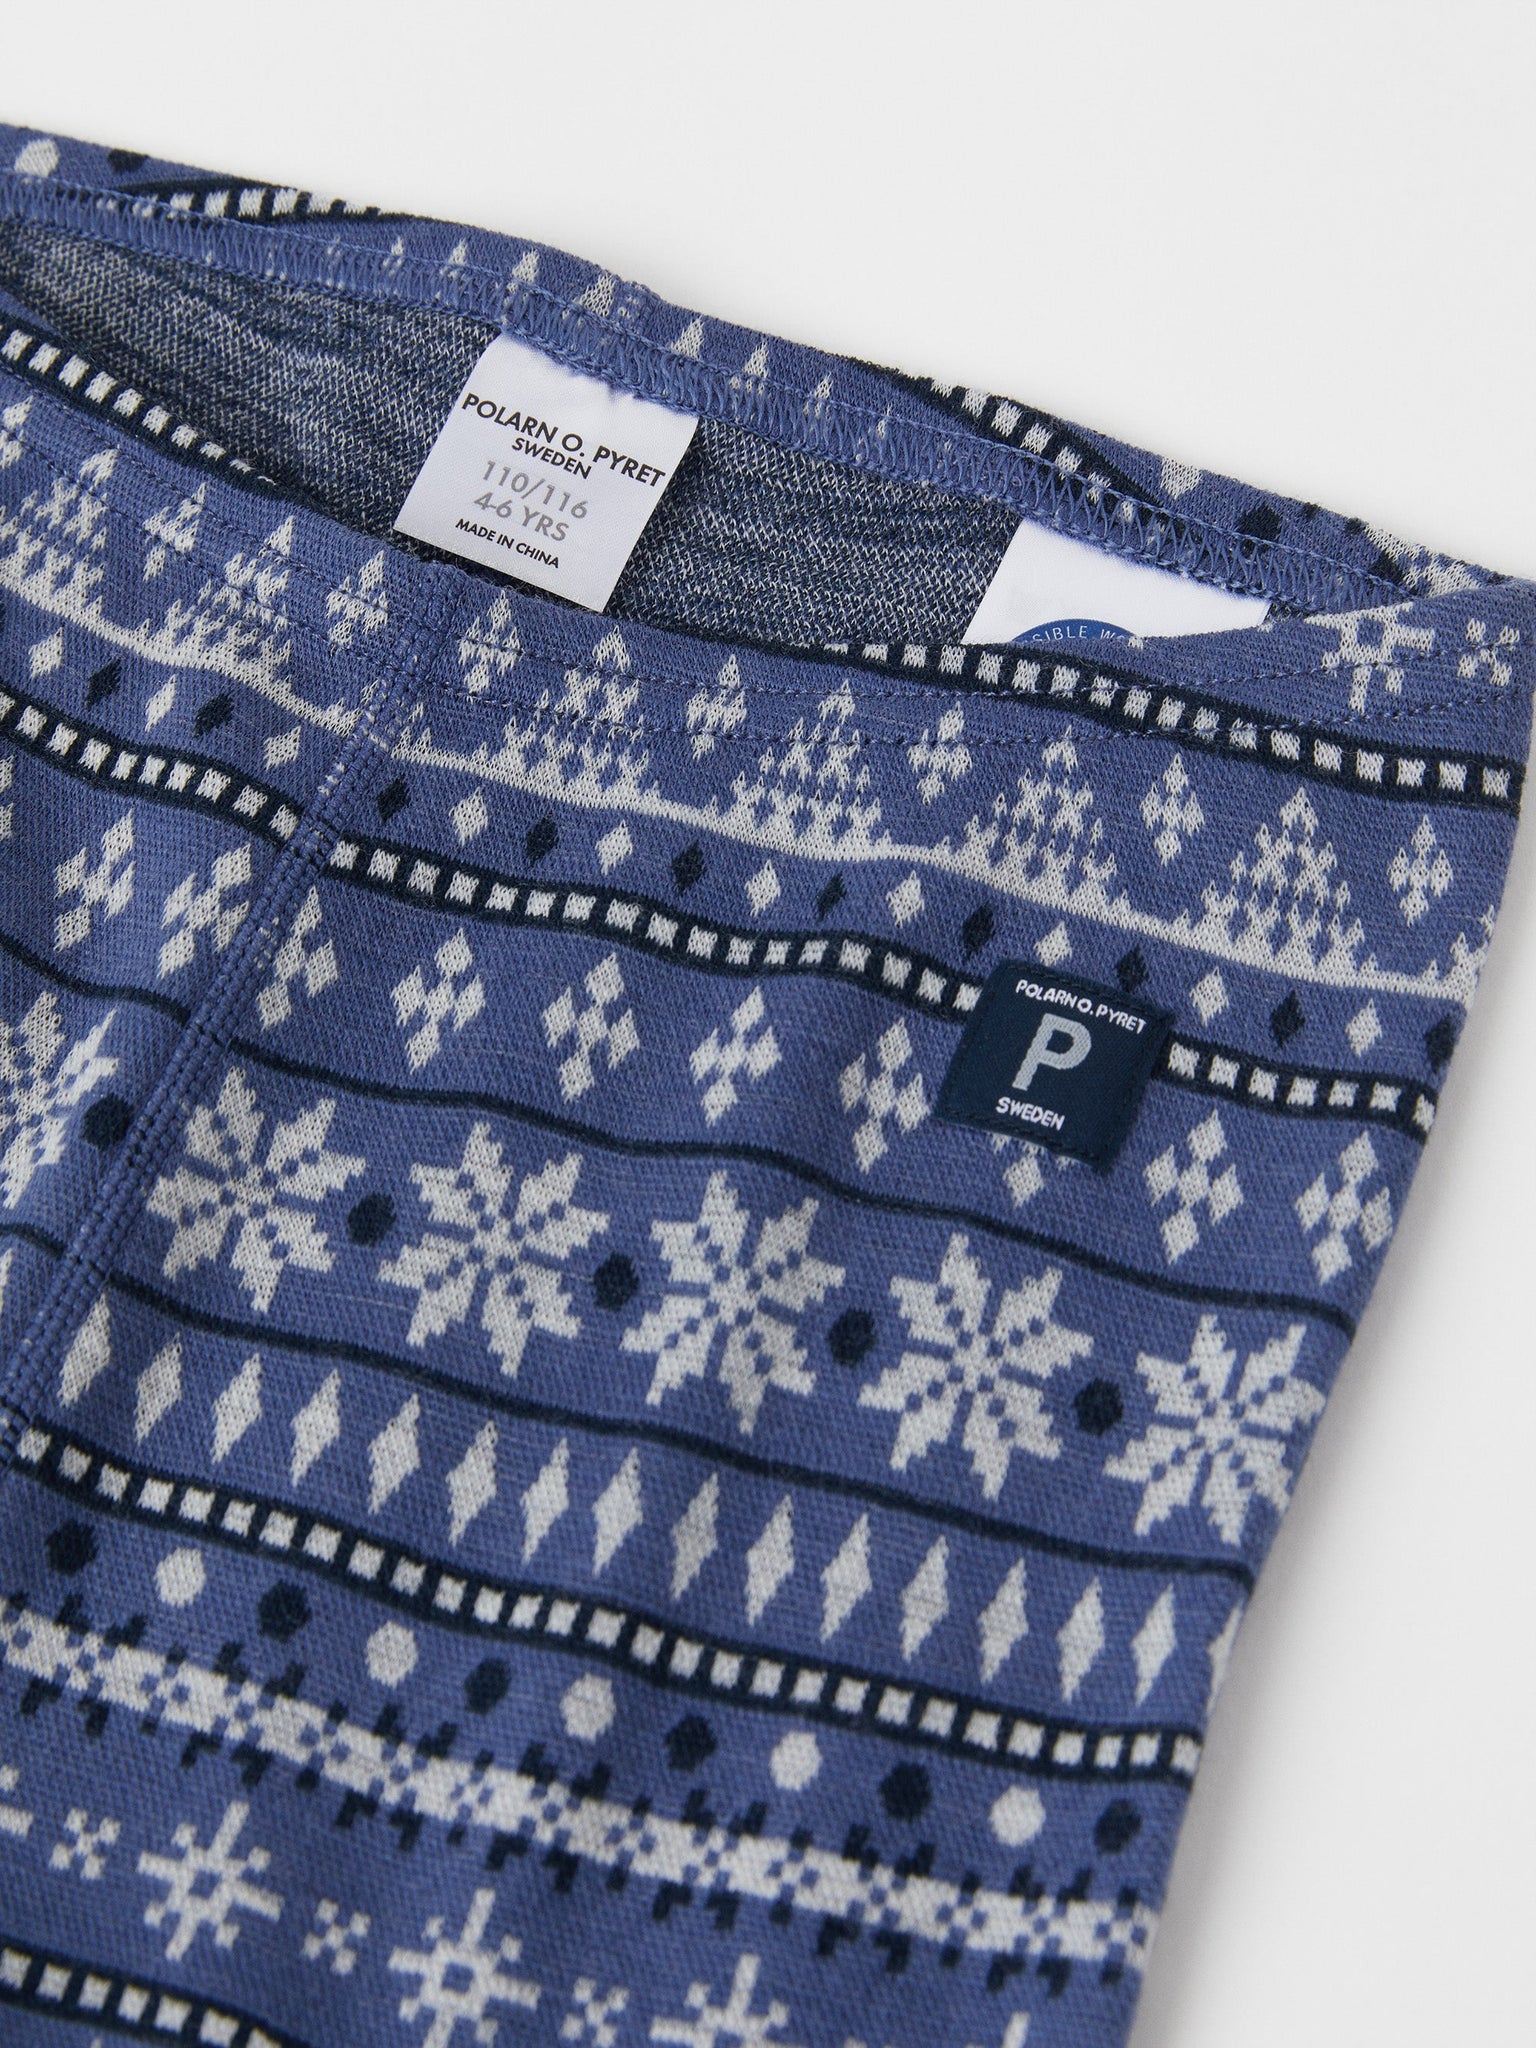 Merino Navy Kids Thermal Leggings from the Polarn O. Pyret outerwear collection. Ethically produced kids outerwear.